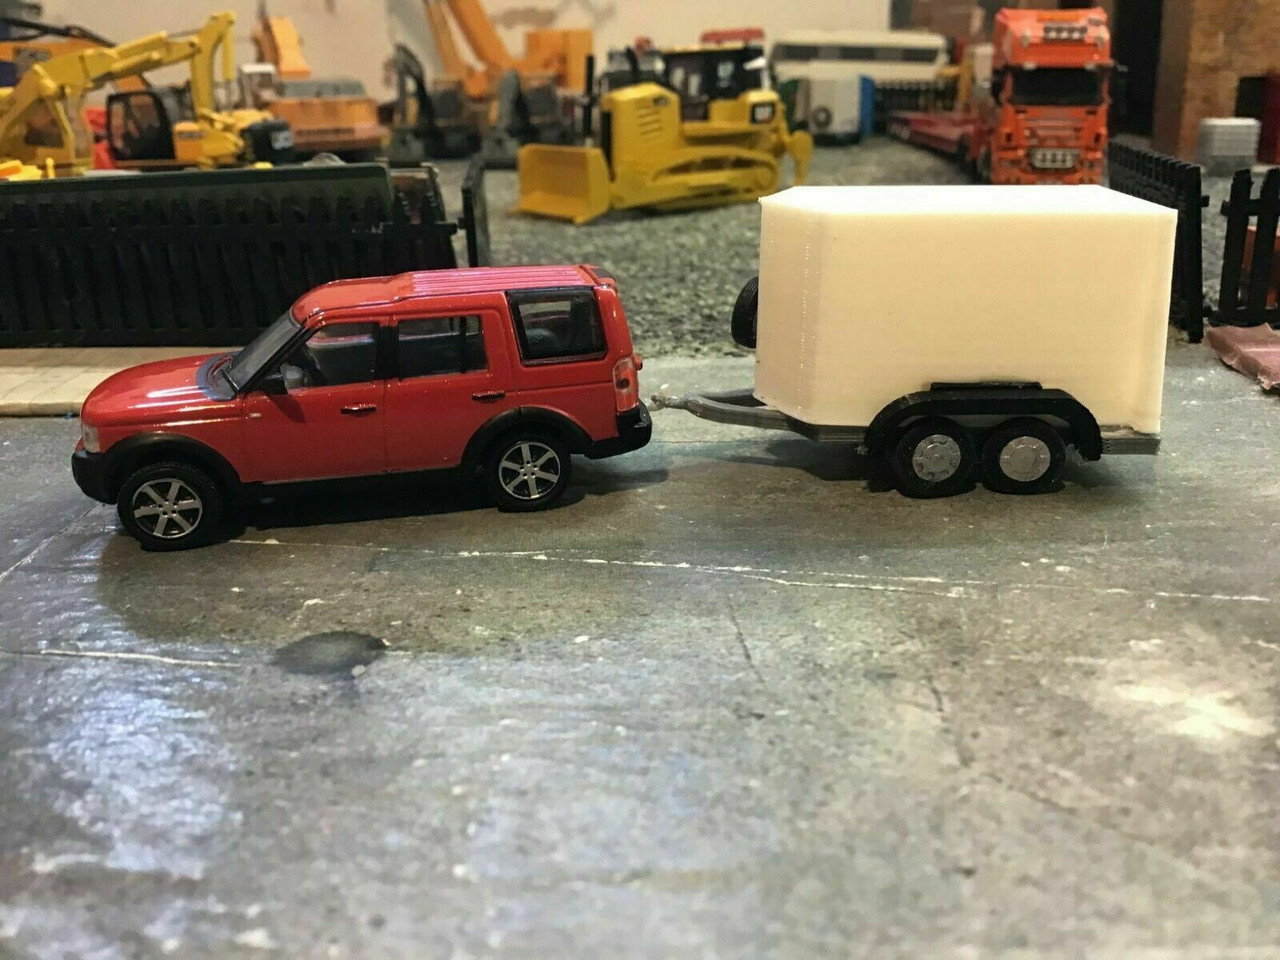 Box trailer, 3d Printed would suit 1/76 oxford diecast and 1/72 scale (00 gauge)